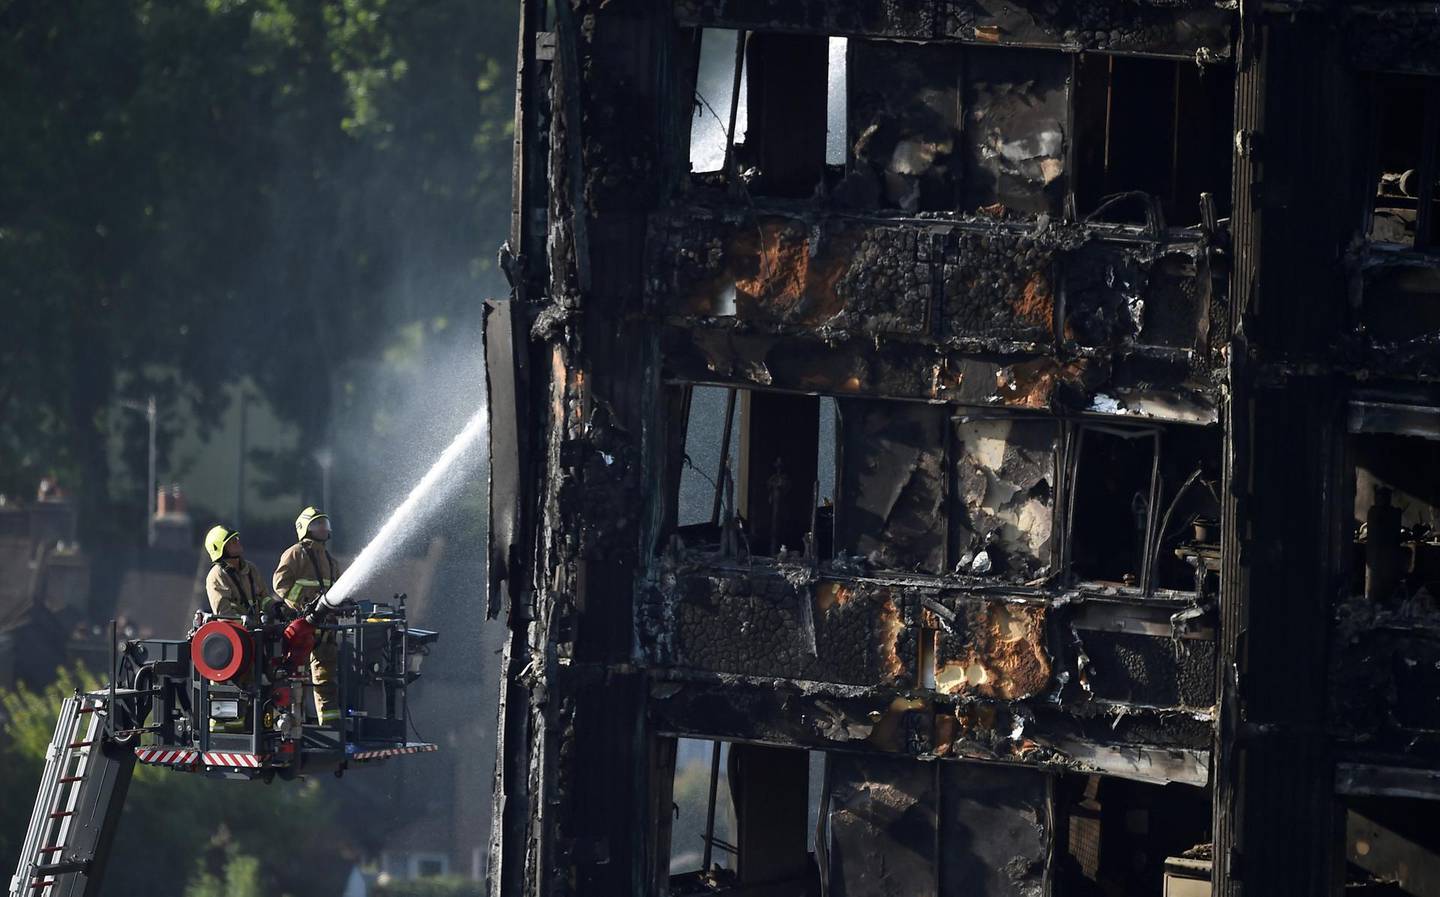 FILE PHOTO: Firefighters spray water onto the Grenfell Tower block which was destroyed in a disastrous fire, in north Kensington, West London, Britain June 16, 2017. REUTERS/Hannah McKay/File Photo